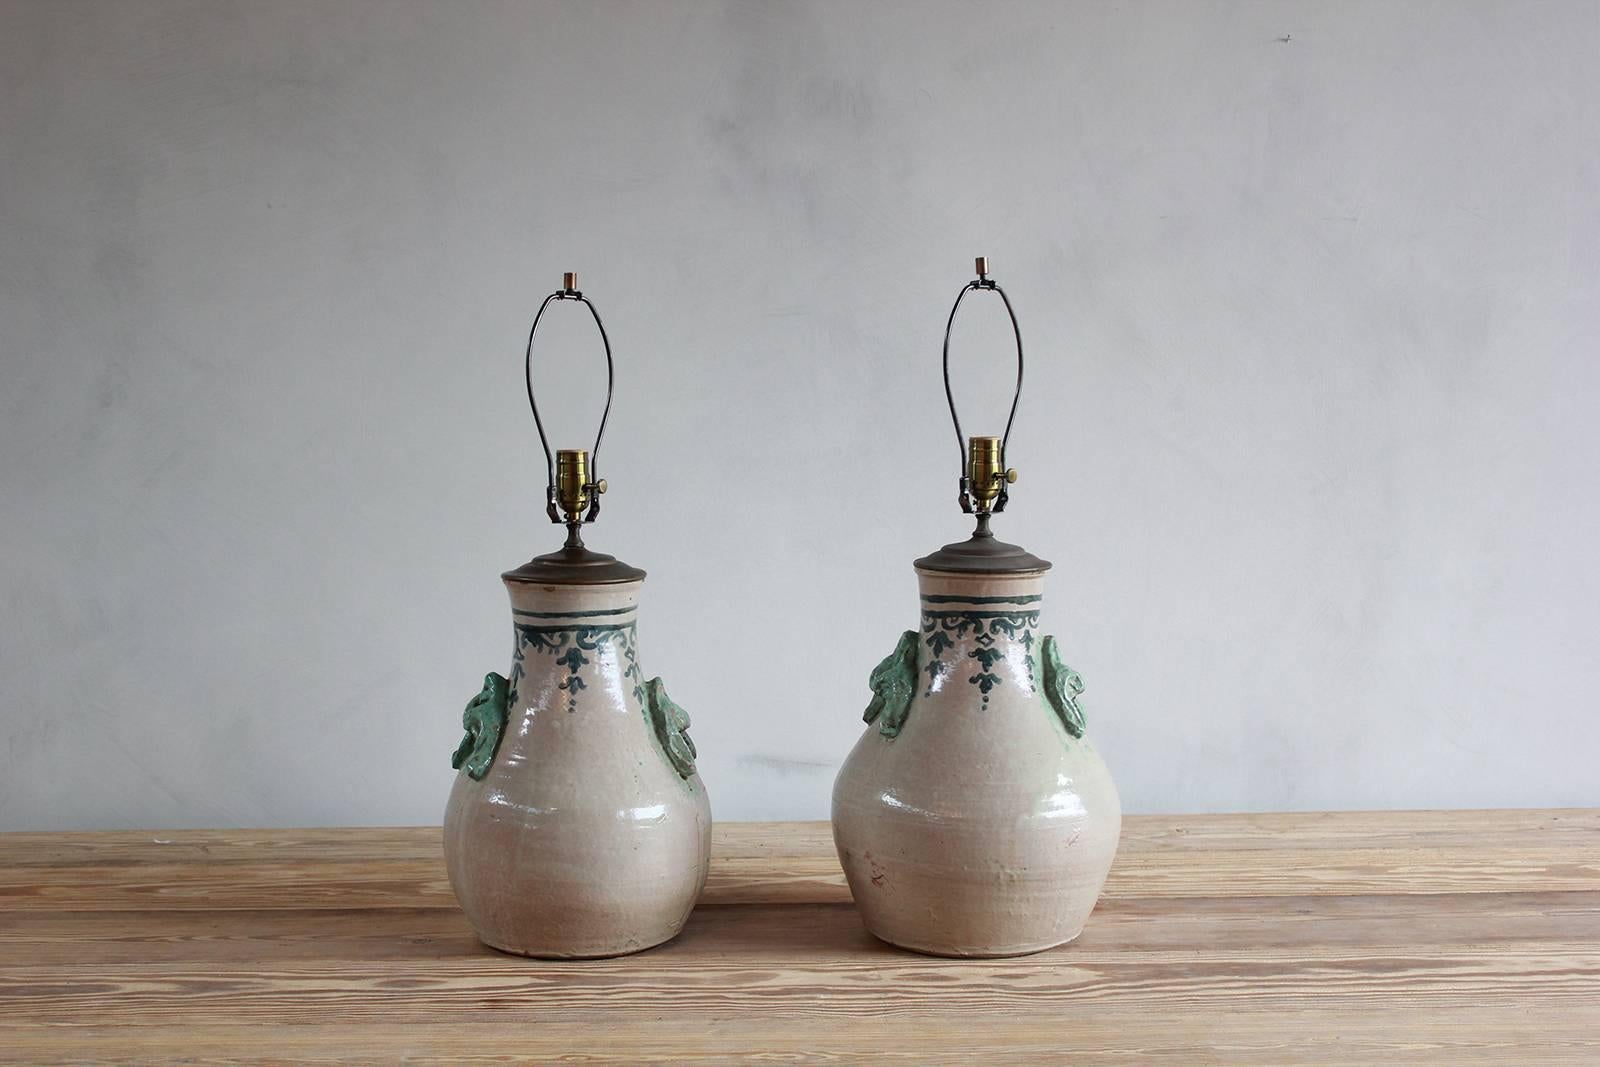 Pair of Ceramic Lamps with Celadon Glazed Embellishments and Blue Details 2